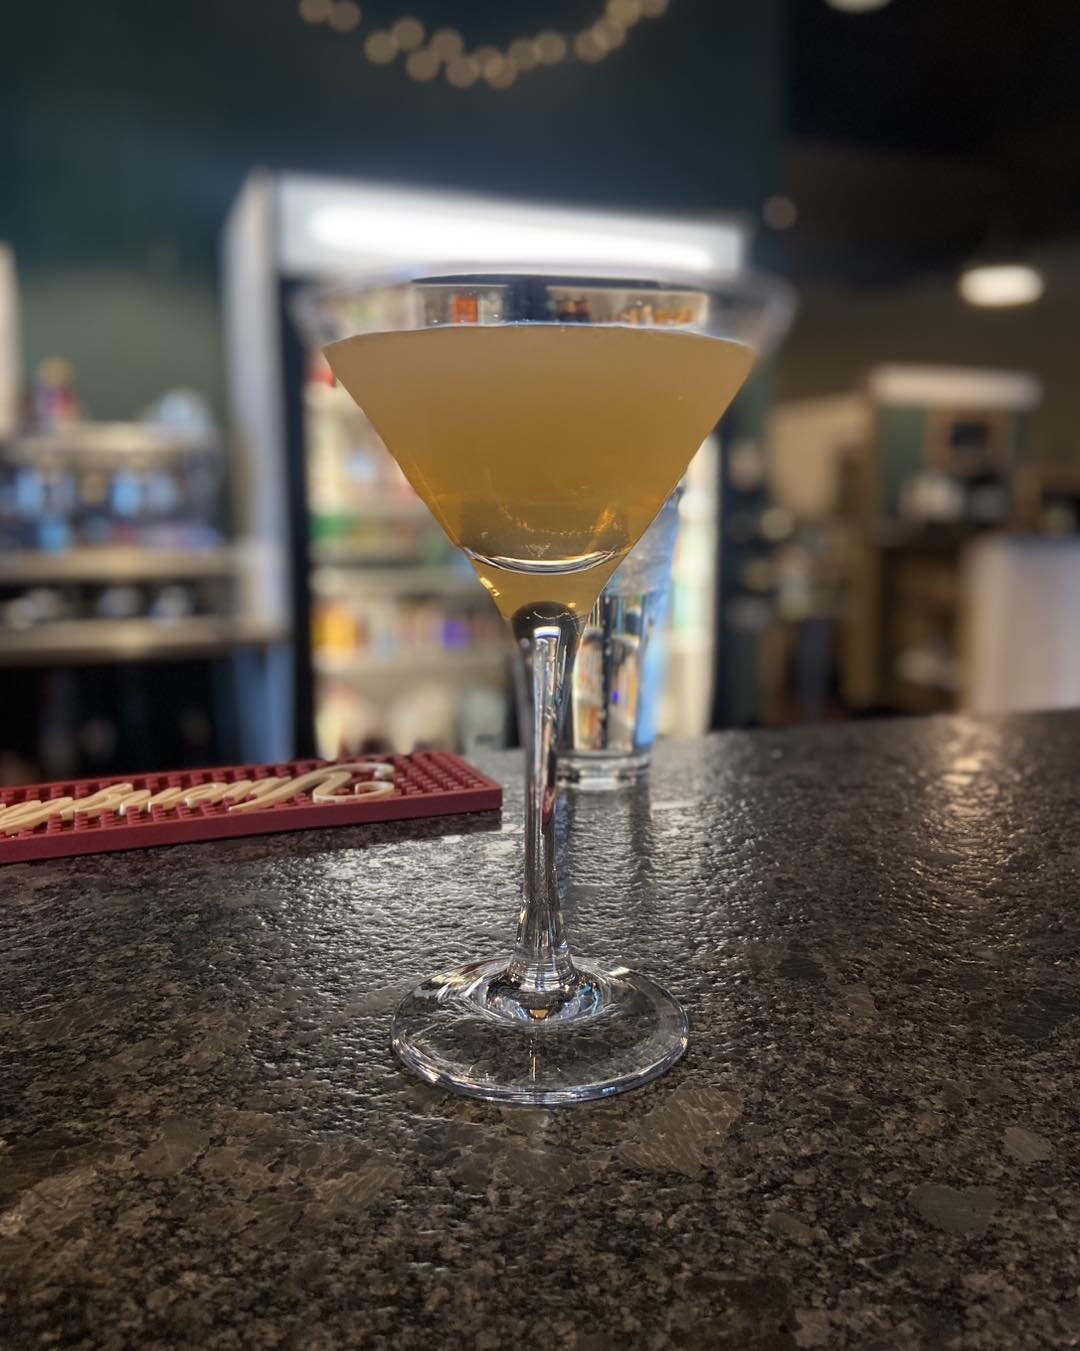 Beauty&hellip; grace&hellip; Genovian Pear-tini.  Come get one today! Or even tomorrow, we&rsquo;re not picky!
&bull;
&bull;
&bull;
#cafe #cocktail #mocktail #ohio #smallbusiness #coffeeshop #sanduskyohio #book #sandusky #bookstore #cheeseboard #coff